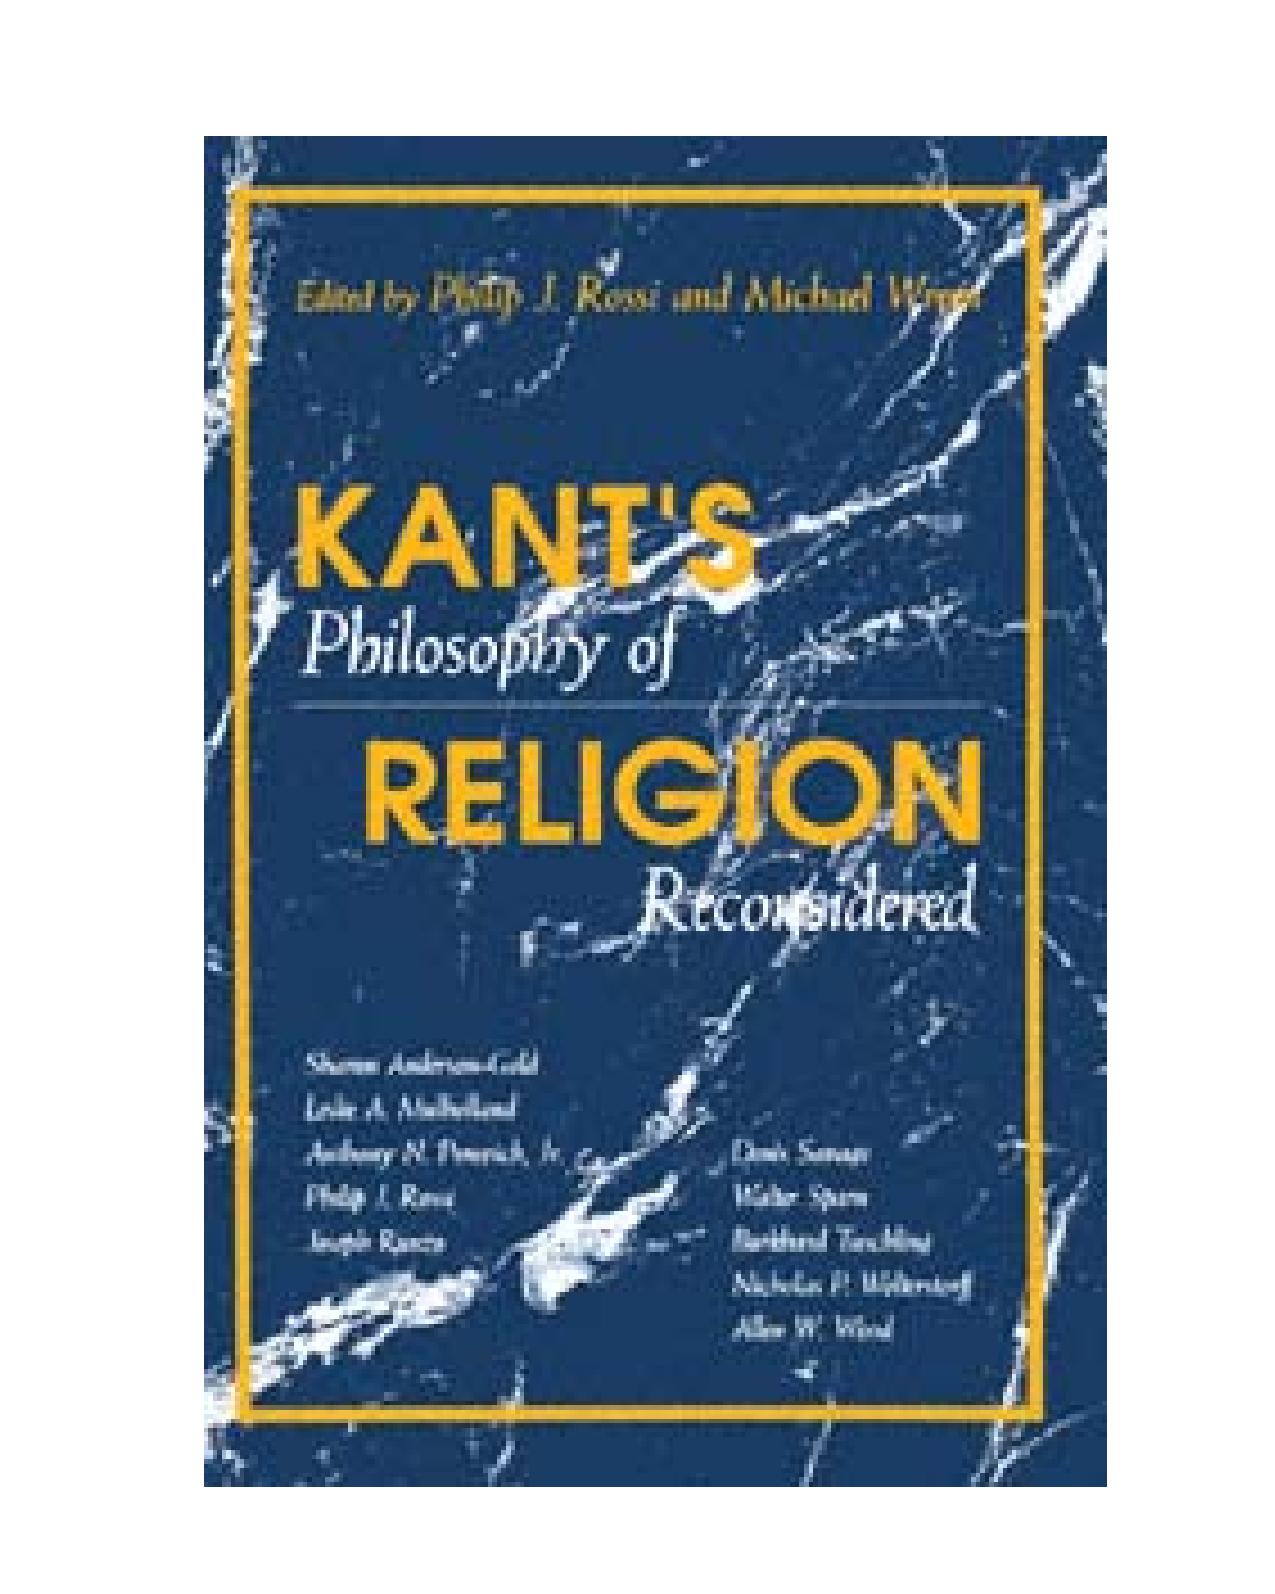 Kant's Philosophy of Religion Reconsidered